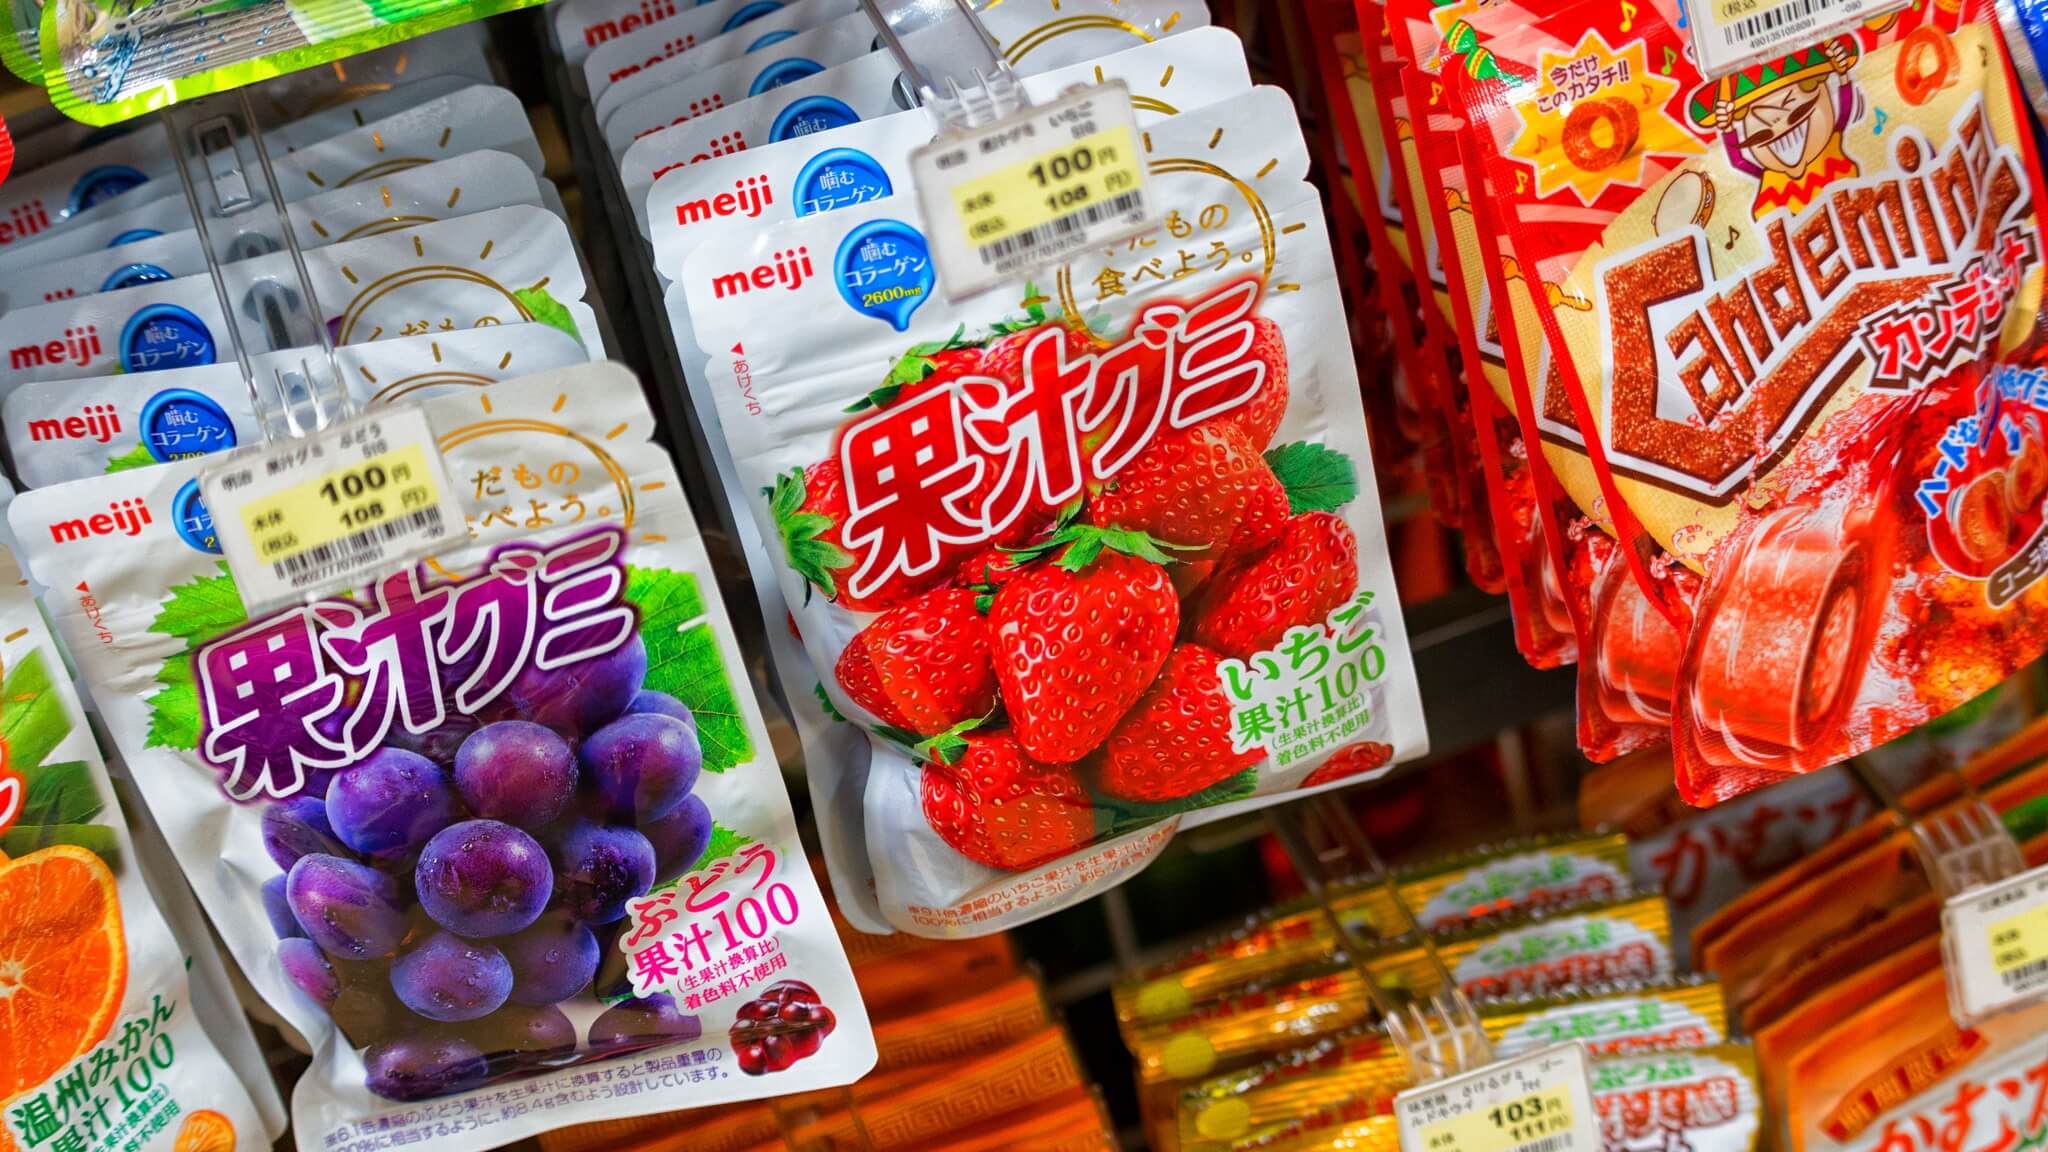 Japan's Largest Confectioner Morinaga & Co. Ends 'Cruel and Archaic' Animal Testing